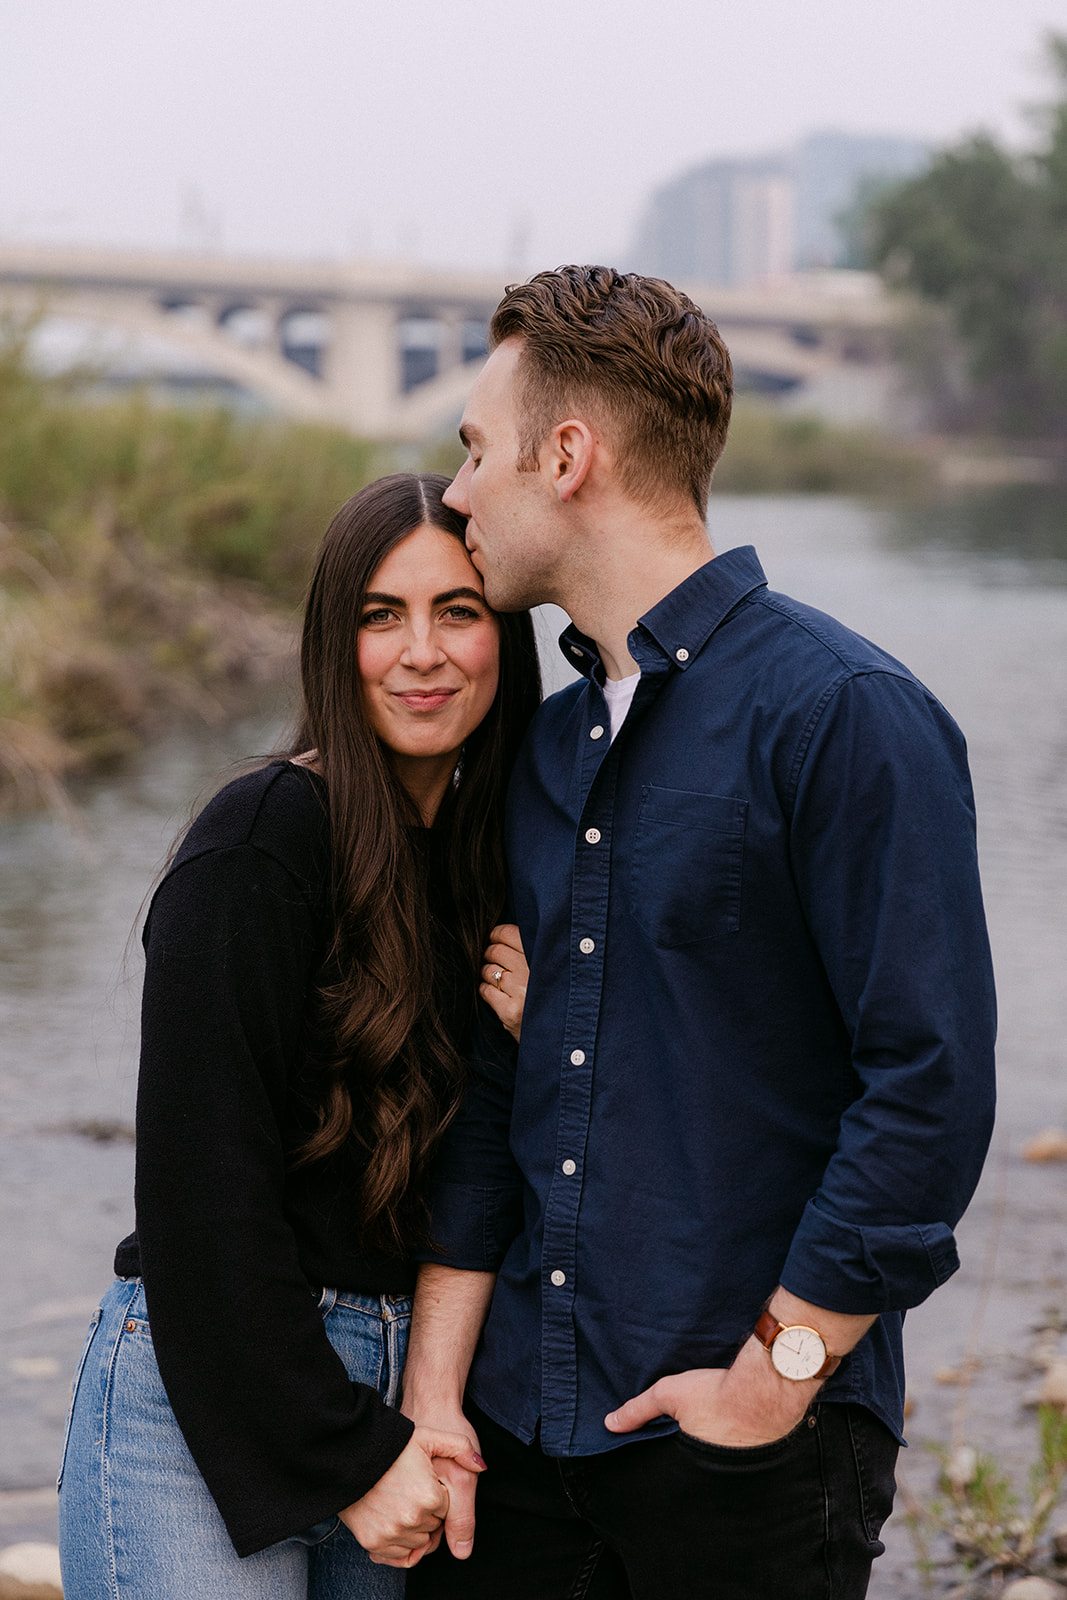 Downtown Calgary Classic and Casual engagement photography, photographs at Centre Street Bridge and Prince's Island Park